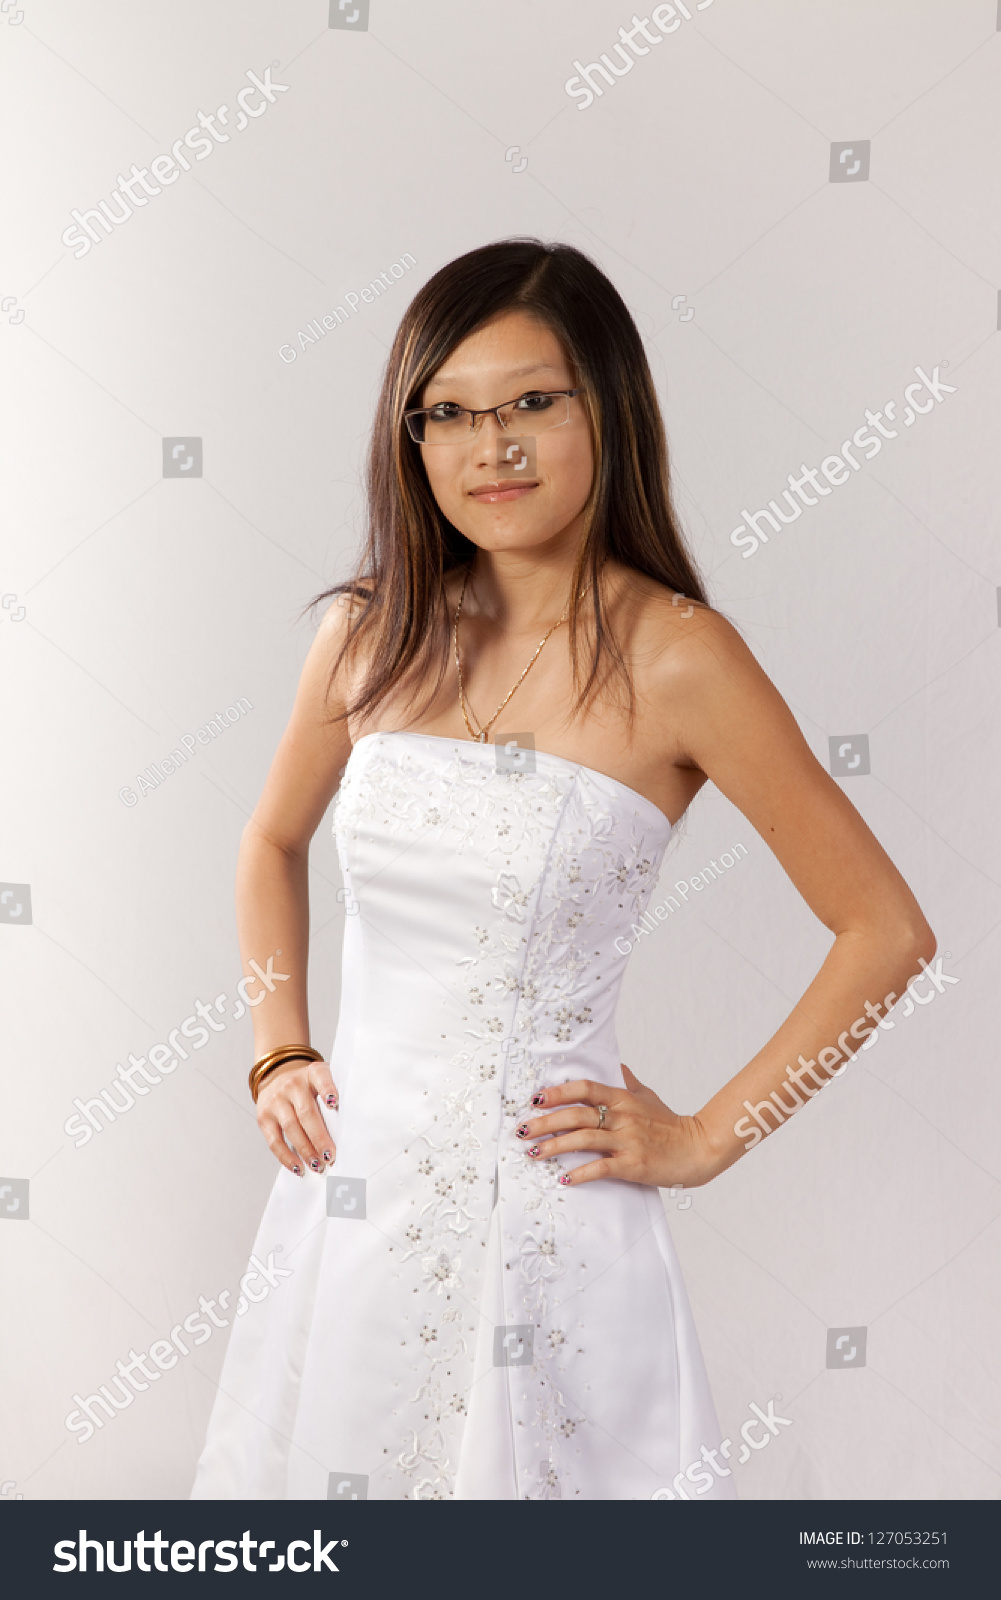 https://image.shutterstock.com/z/stock-photo-lovely-east-asian-bride-in-her-white-wedding-dress-looking-at-the-camera-with-a-happy-friendly-127053251.jpg